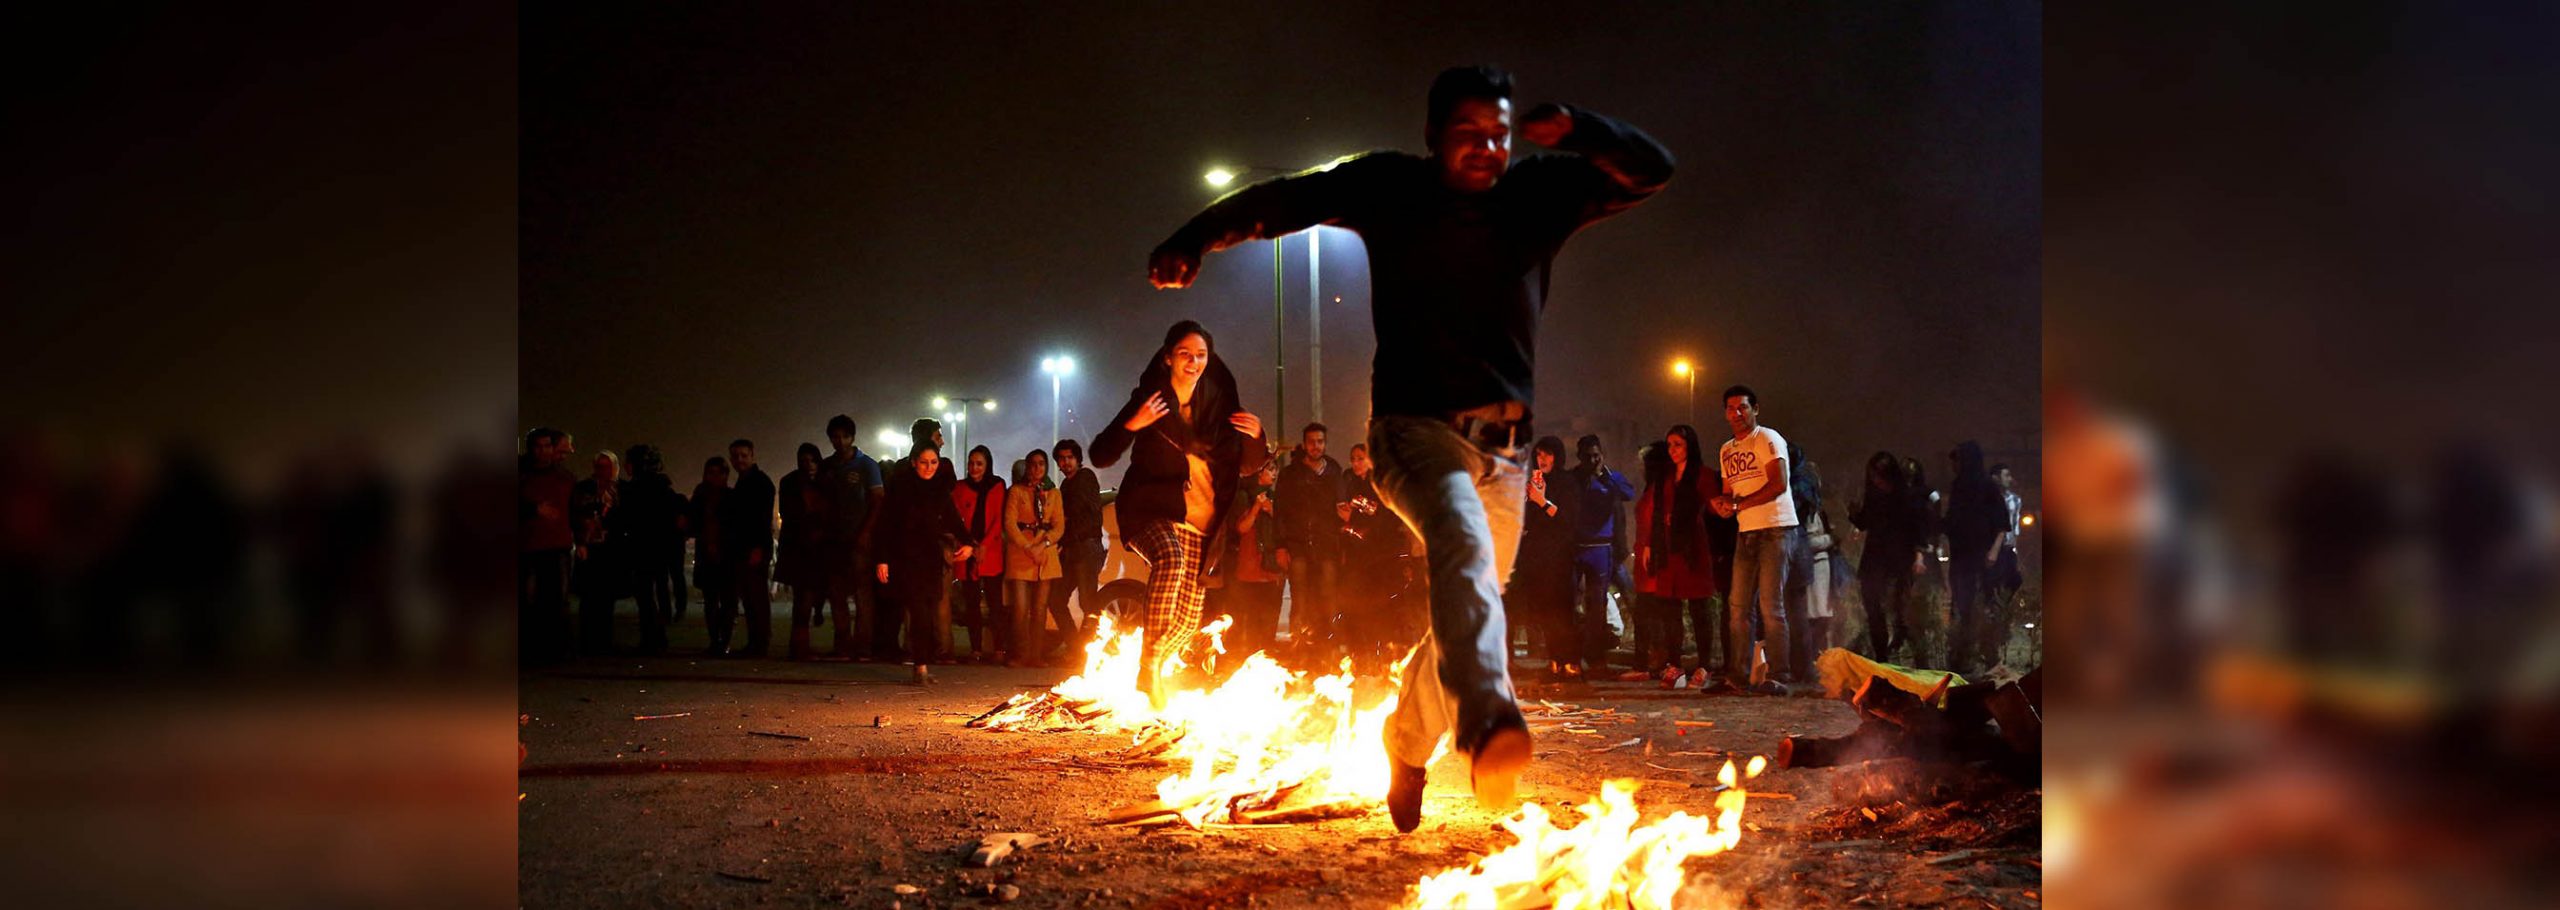 Chaharshanbe Suri | The ancient ritual for welcoming Nowruz